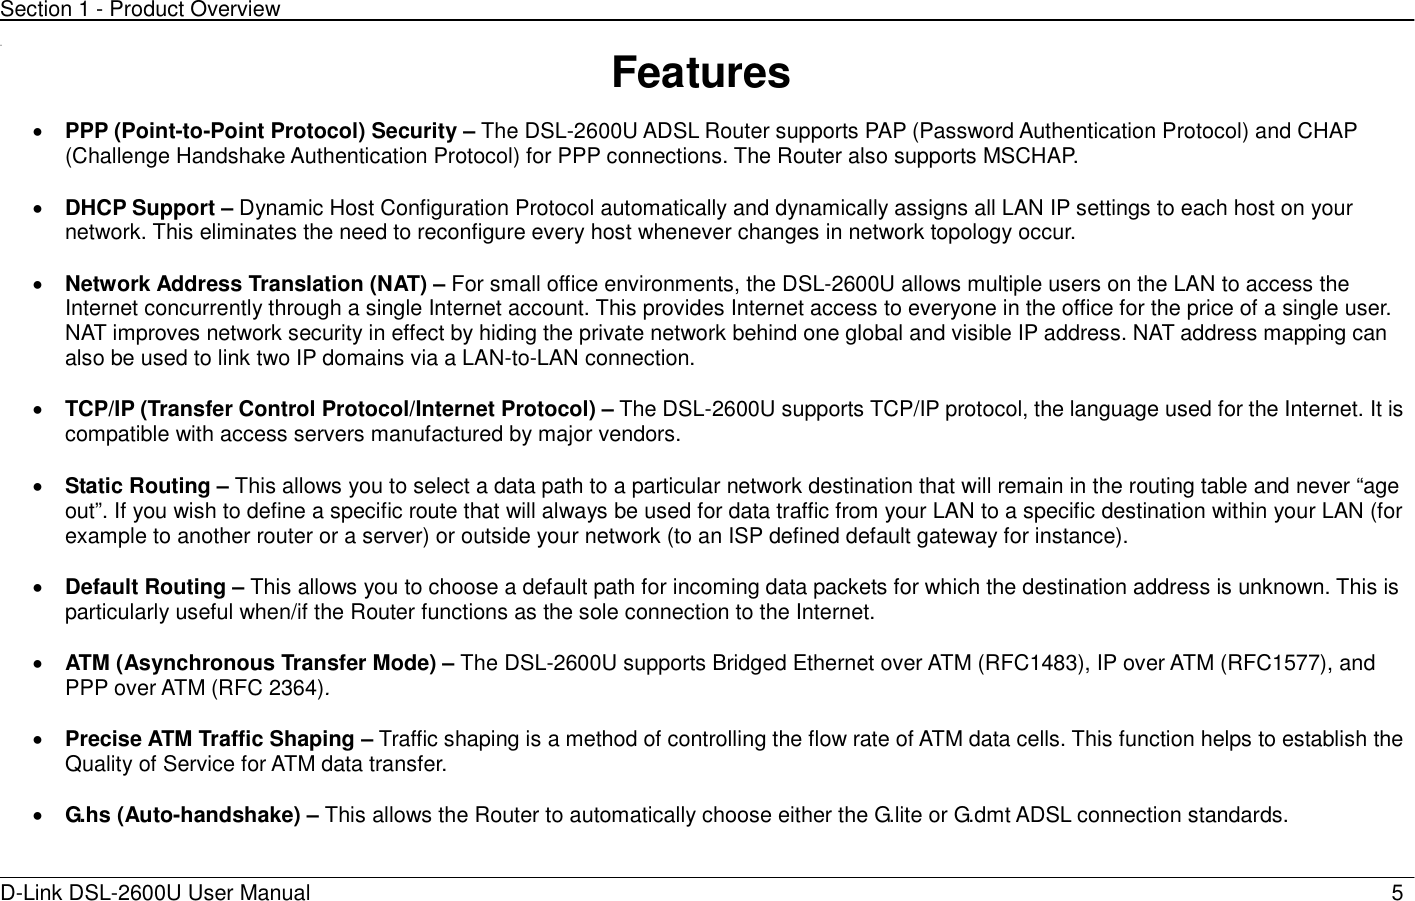 Section 1 - Product Overview  D-Link DSL-2600U User Manual                            5 11  Features  • PPP (Point-to-Point Protocol) Security – The DSL-2600U ADSL Router supports PAP (Password Authentication Protocol) and CHAP (Challenge Handshake Authentication Protocol) for PPP connections. The Router also supports MSCHAP.  • DHCP Support – Dynamic Host Configuration Protocol automatically and dynamically assigns all LAN IP settings to each host on your network. This eliminates the need to reconfigure every host whenever changes in network topology occur.  • Network Address Translation (NAT) – For small office environments, the DSL-2600U allows multiple users on the LAN to access the Internet concurrently through a single Internet account. This provides Internet access to everyone in the office for the price of a single user. NAT improves network security in effect by hiding the private network behind one global and visible IP address. NAT address mapping can also be used to link two IP domains via a LAN-to-LAN connection.  • TCP/IP (Transfer Control Protocol/Internet Protocol) – The DSL-2600U supports TCP/IP protocol, the language used for the Internet. It is compatible with access servers manufactured by major vendors.  • Static Routing – This allows you to select a data path to a particular network destination that will remain in the routing table and never “age out”. If you wish to define a specific route that will always be used for data traffic from your LAN to a specific destination within your LAN (for example to another router or a server) or outside your network (to an ISP defined default gateway for instance).      • Default Routing – This allows you to choose a default path for incoming data packets for which the destination address is unknown. This is particularly useful when/if the Router functions as the sole connection to the Internet.  • ATM (Asynchronous Transfer Mode) – The DSL-2600U supports Bridged Ethernet over ATM (RFC1483), IP over ATM (RFC1577), and PPP over ATM (RFC 2364).   • Precise ATM Traffic Shaping – Traffic shaping is a method of controlling the flow rate of ATM data cells. This function helps to establish the Quality of Service for ATM data transfer.  • G.hs (Auto-handshake) – This allows the Router to automatically choose either the G.lite or G.dmt ADSL connection standards.    